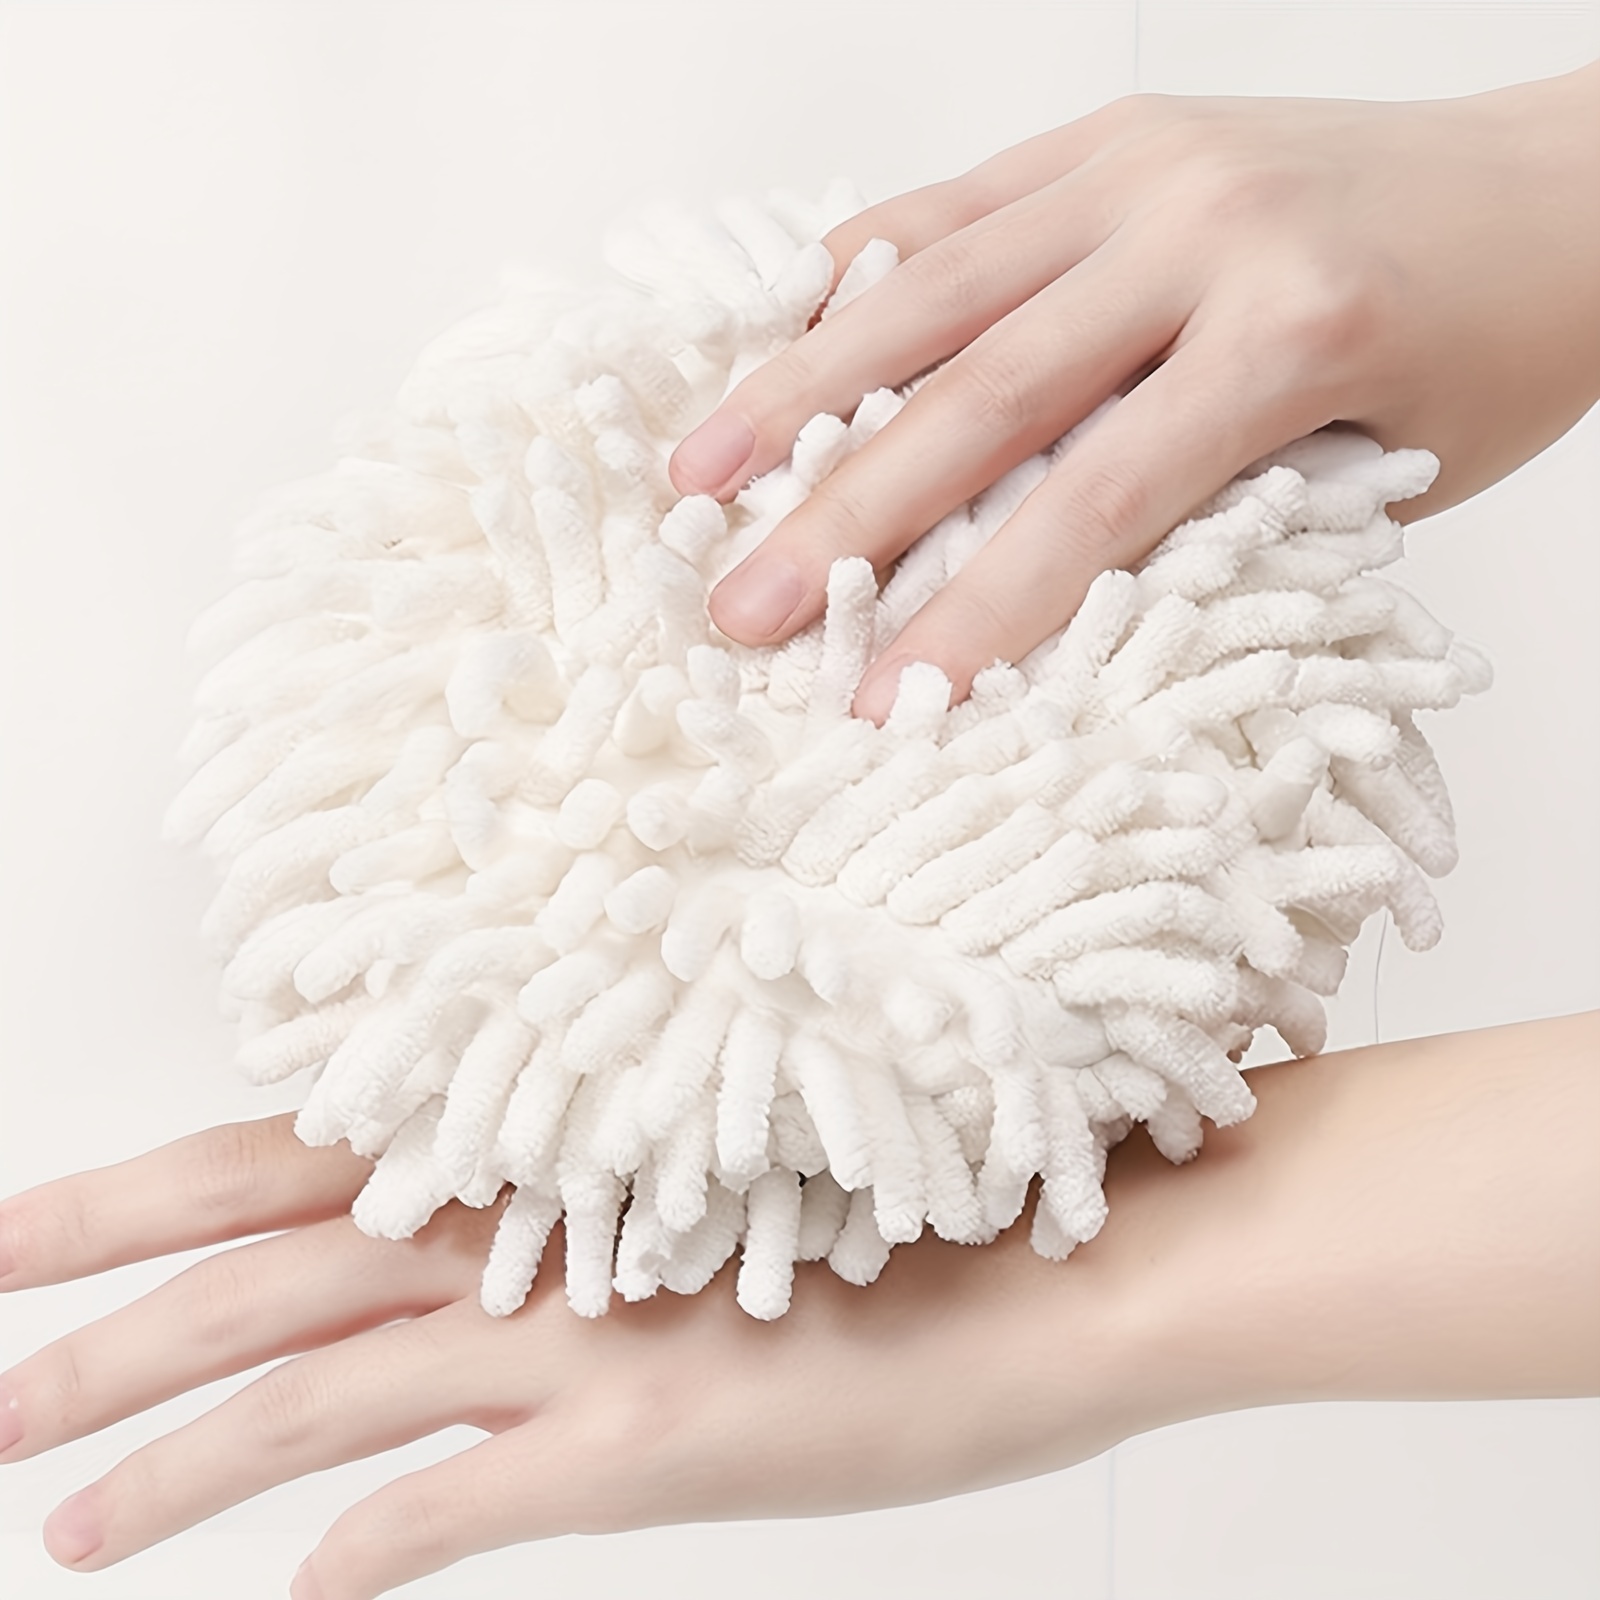  Nulubuu Soft Absorbent Chenille Ball Towel Sets, Quick